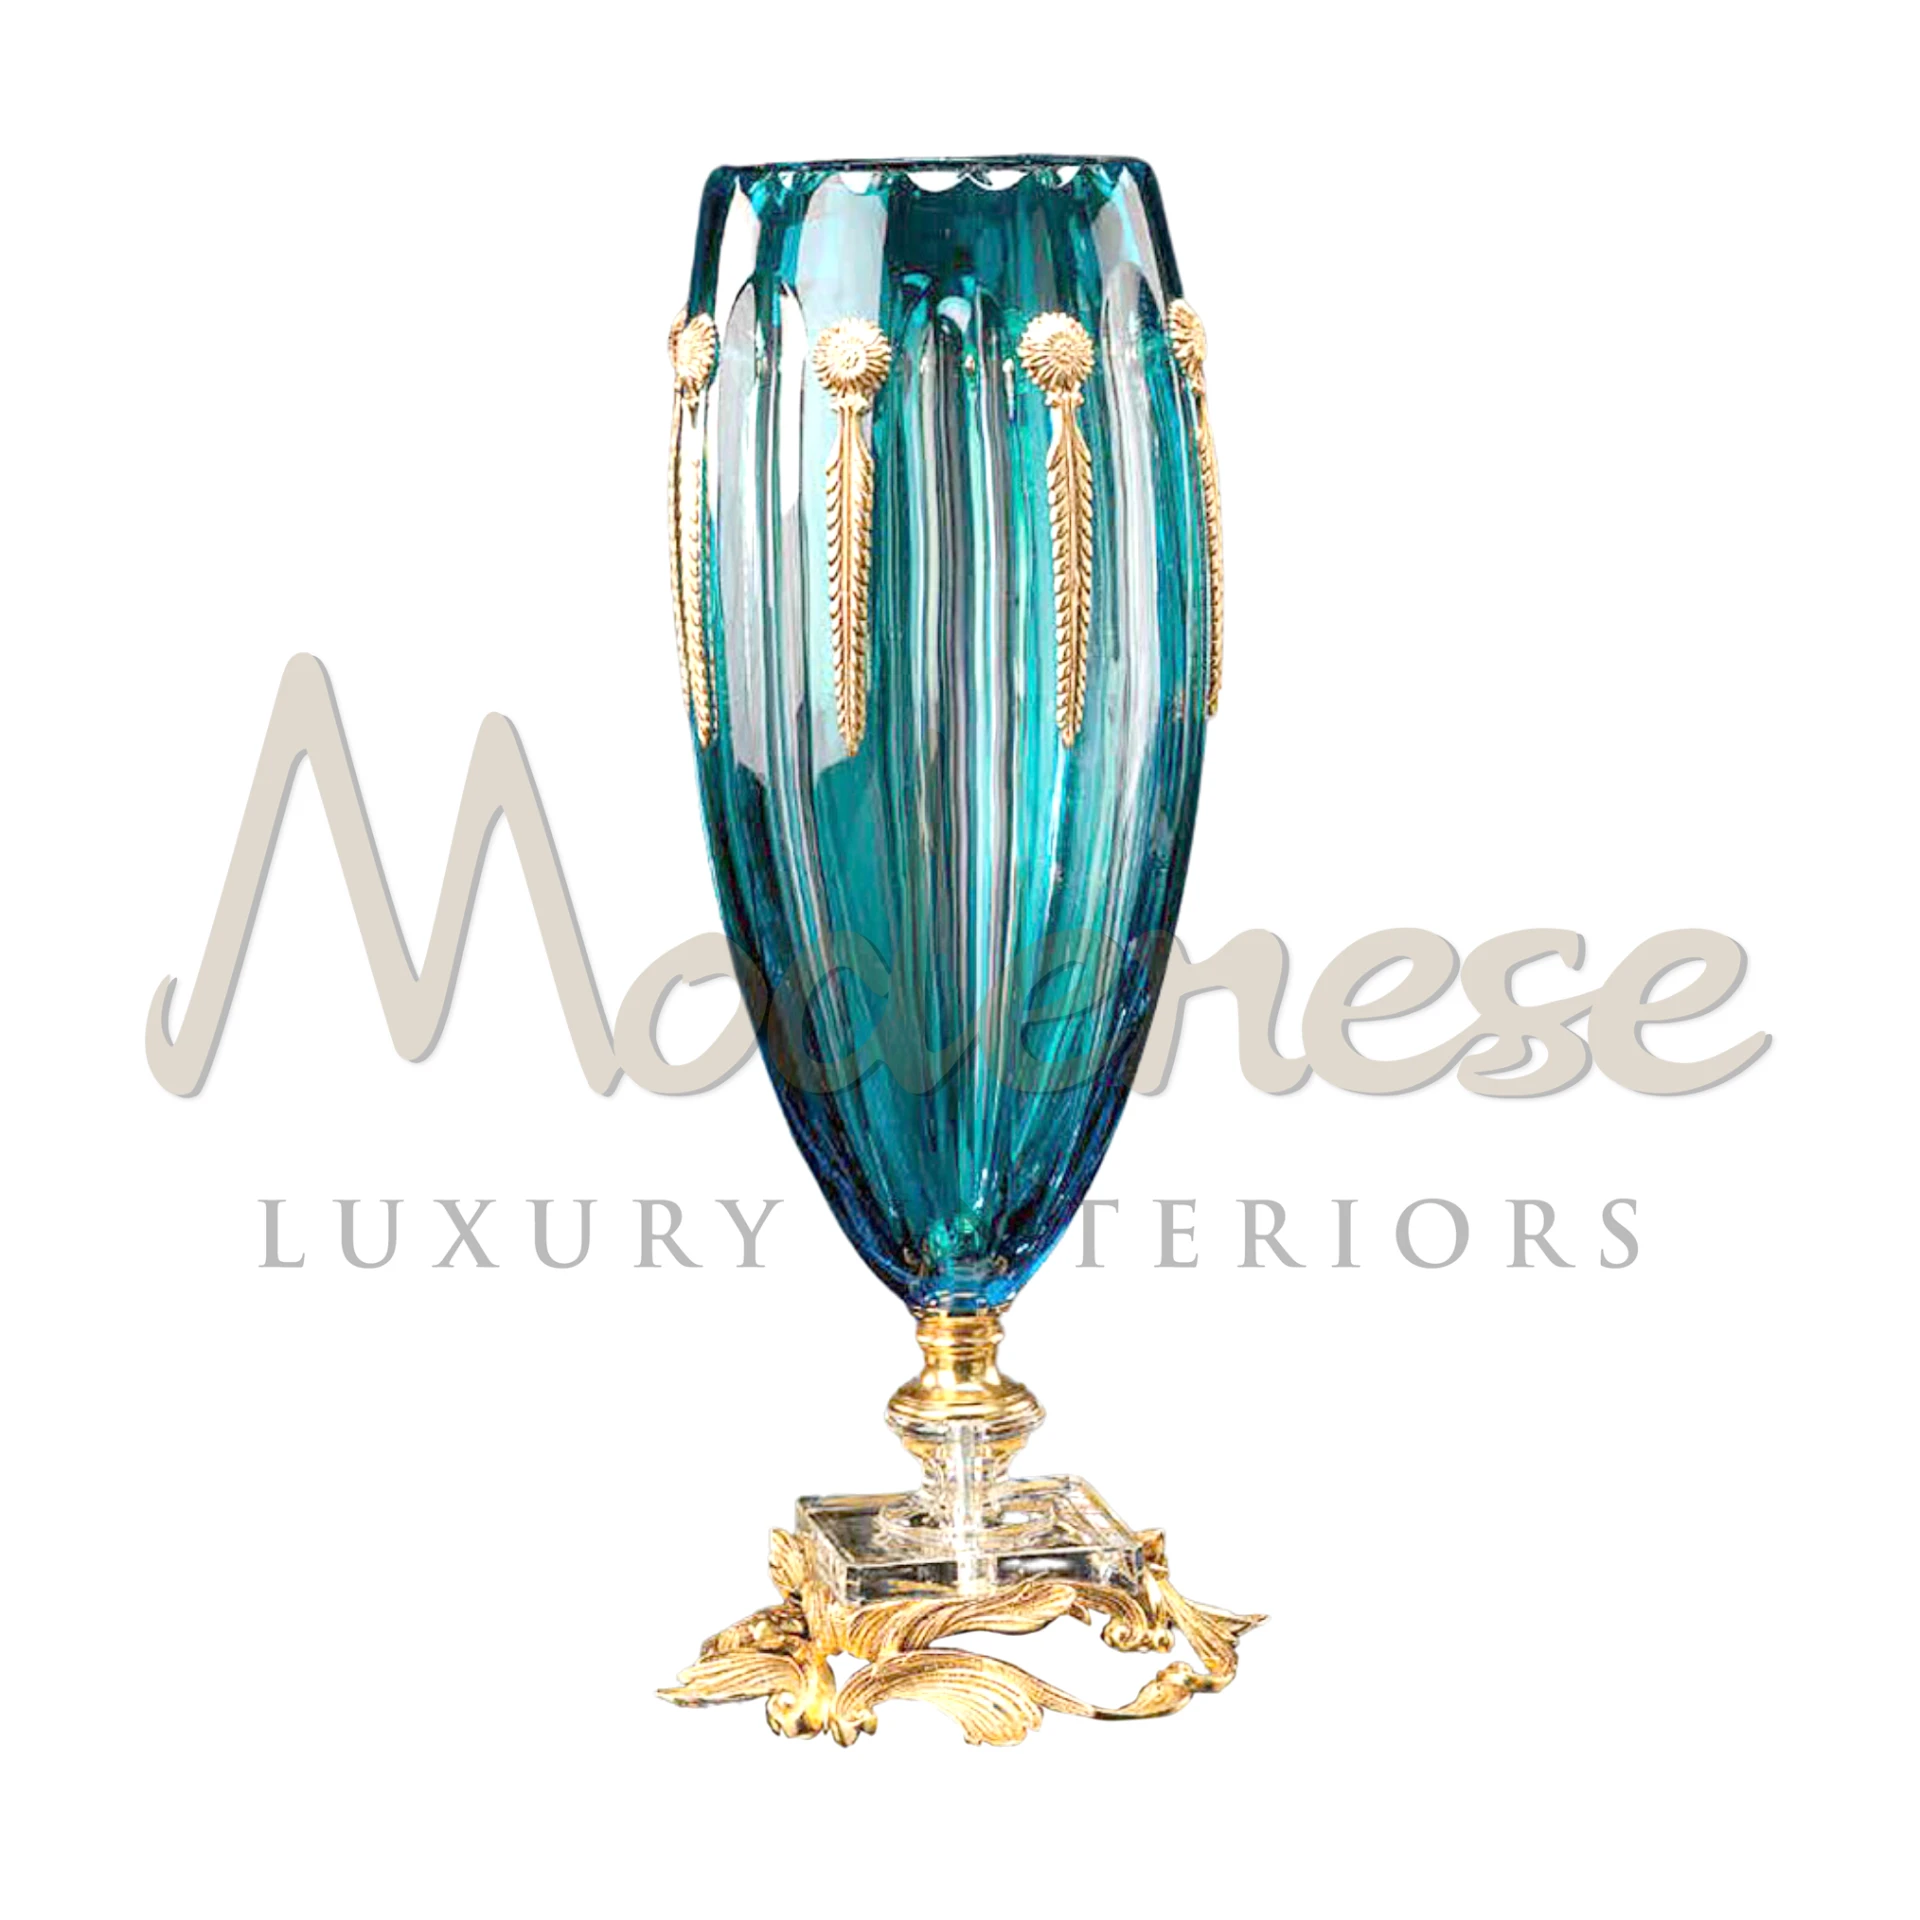 Classical Tall Turquoise Vase, luxurious and slender with intricate designs, embodies graceful classical style for sophisticated luxury interiors.






